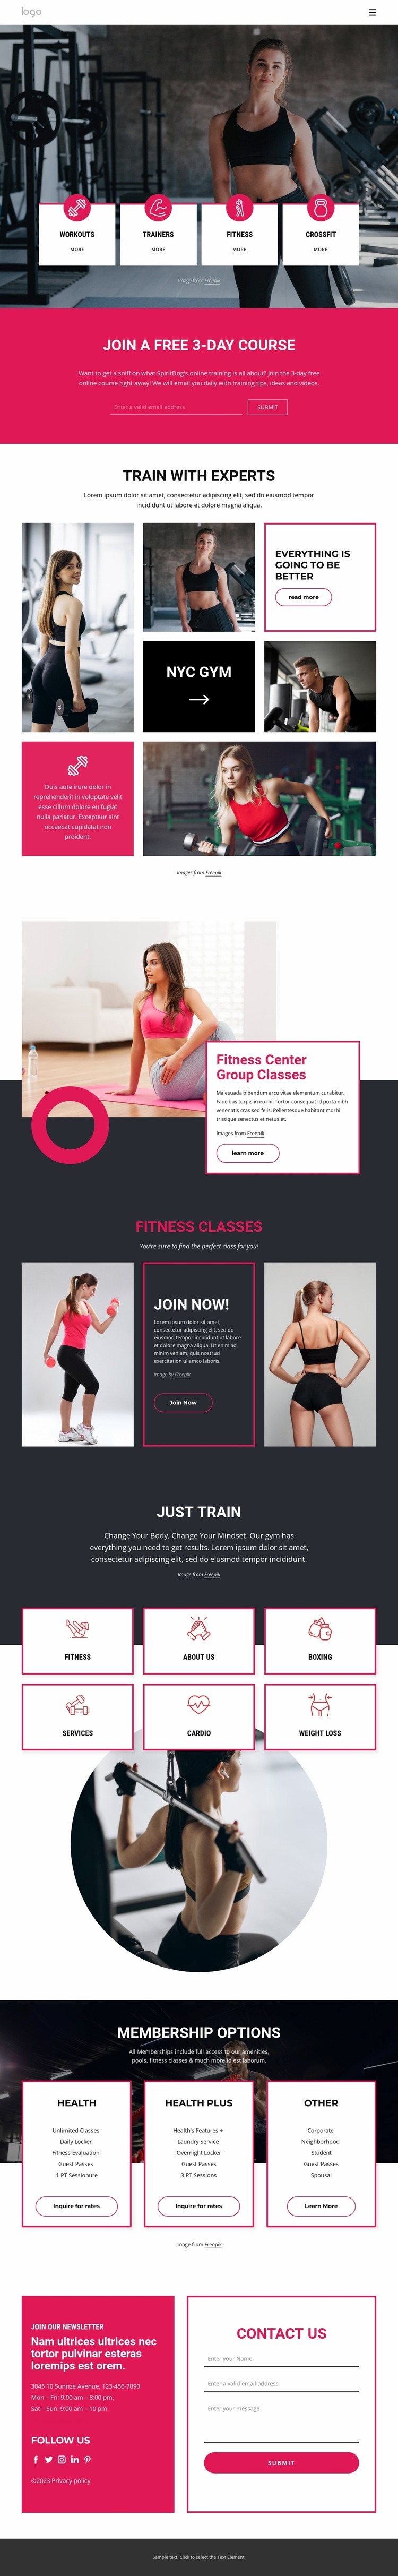 Join a Crossfit gym Web Page Design